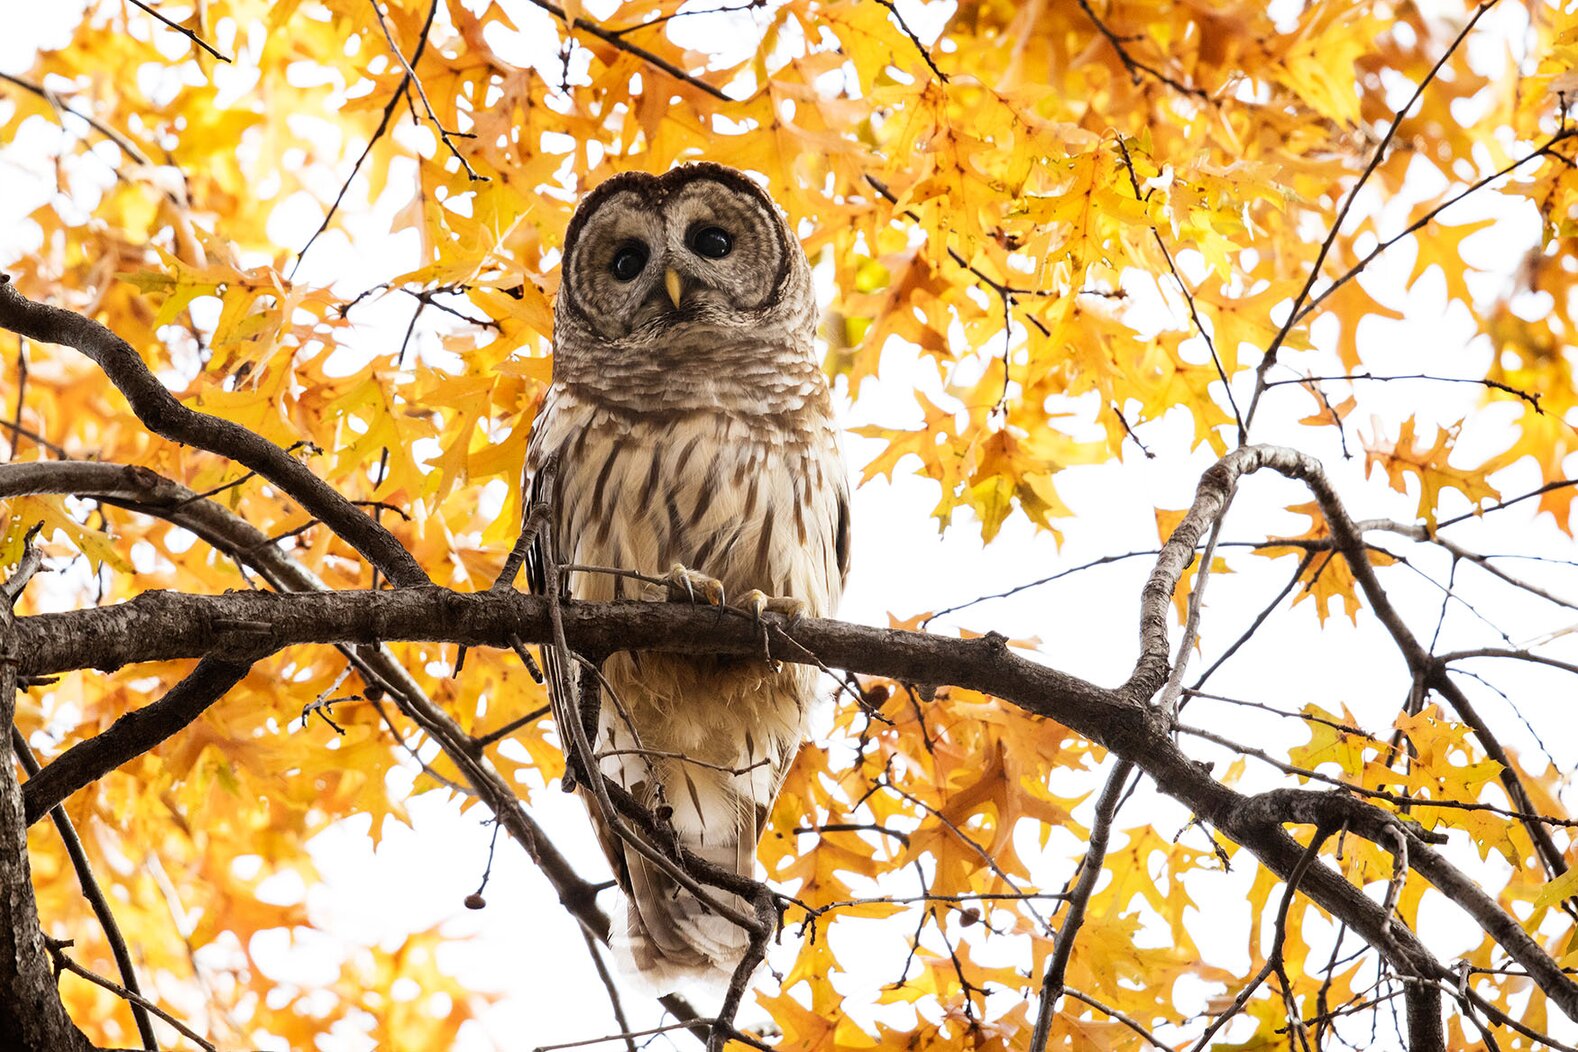 Often one or two Barred Owls winter in Central Park. Photo: François Portmann